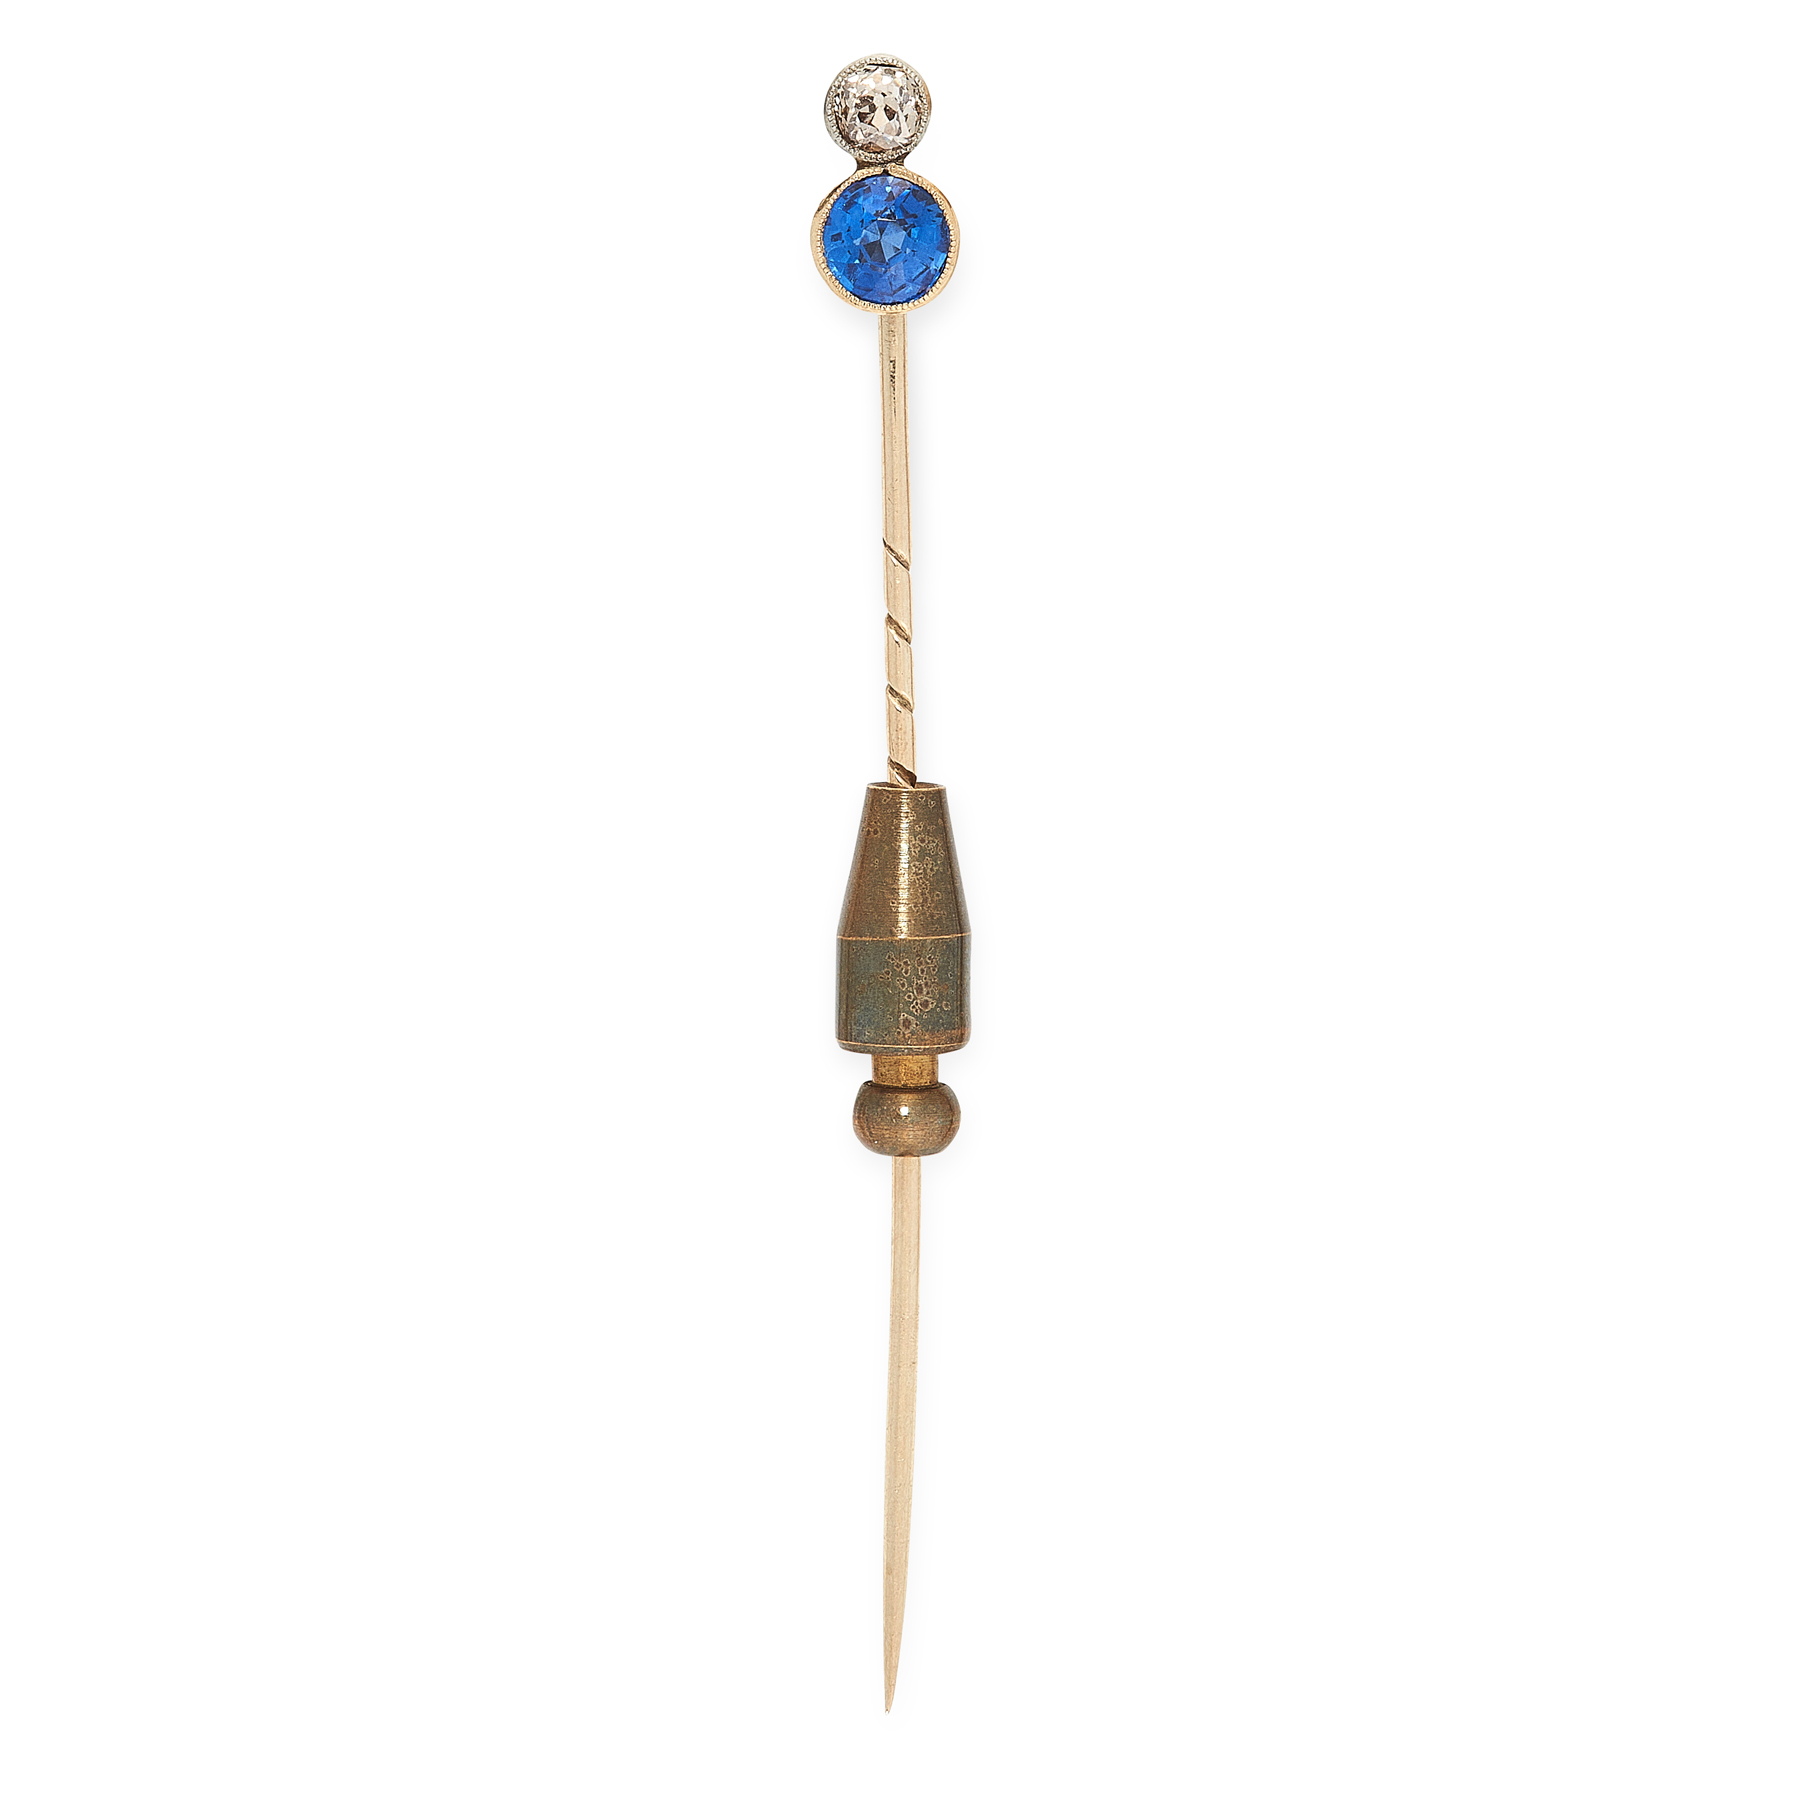 AN ANTIQUE SAPPHIRE AND DIAMOND TIE PIN in yellow gold, the stick pin designed with a round cut